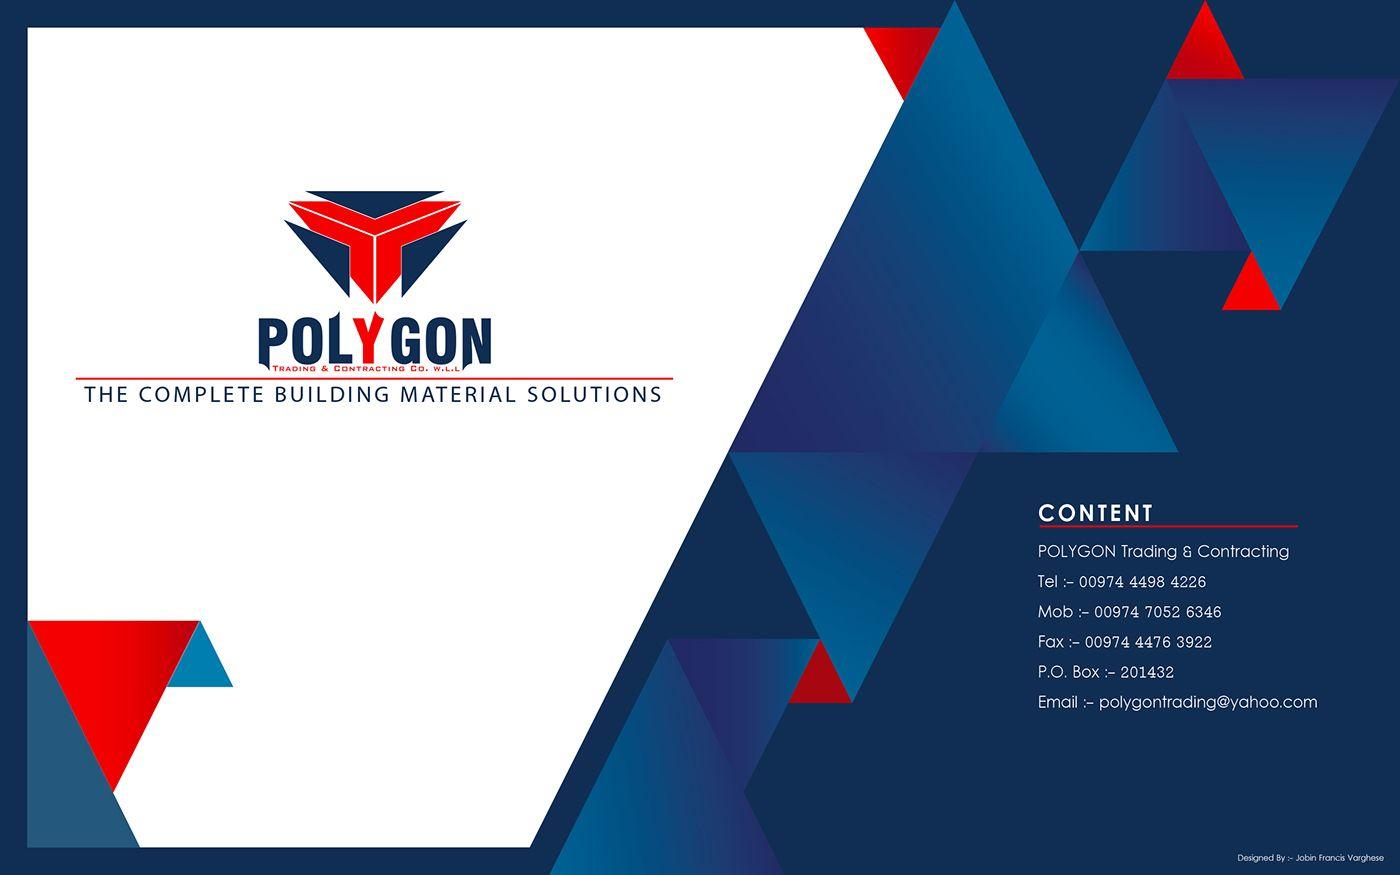 Polygon with a Blue P Logo - POLYGON TRADING & CONTRACTING PROFILE